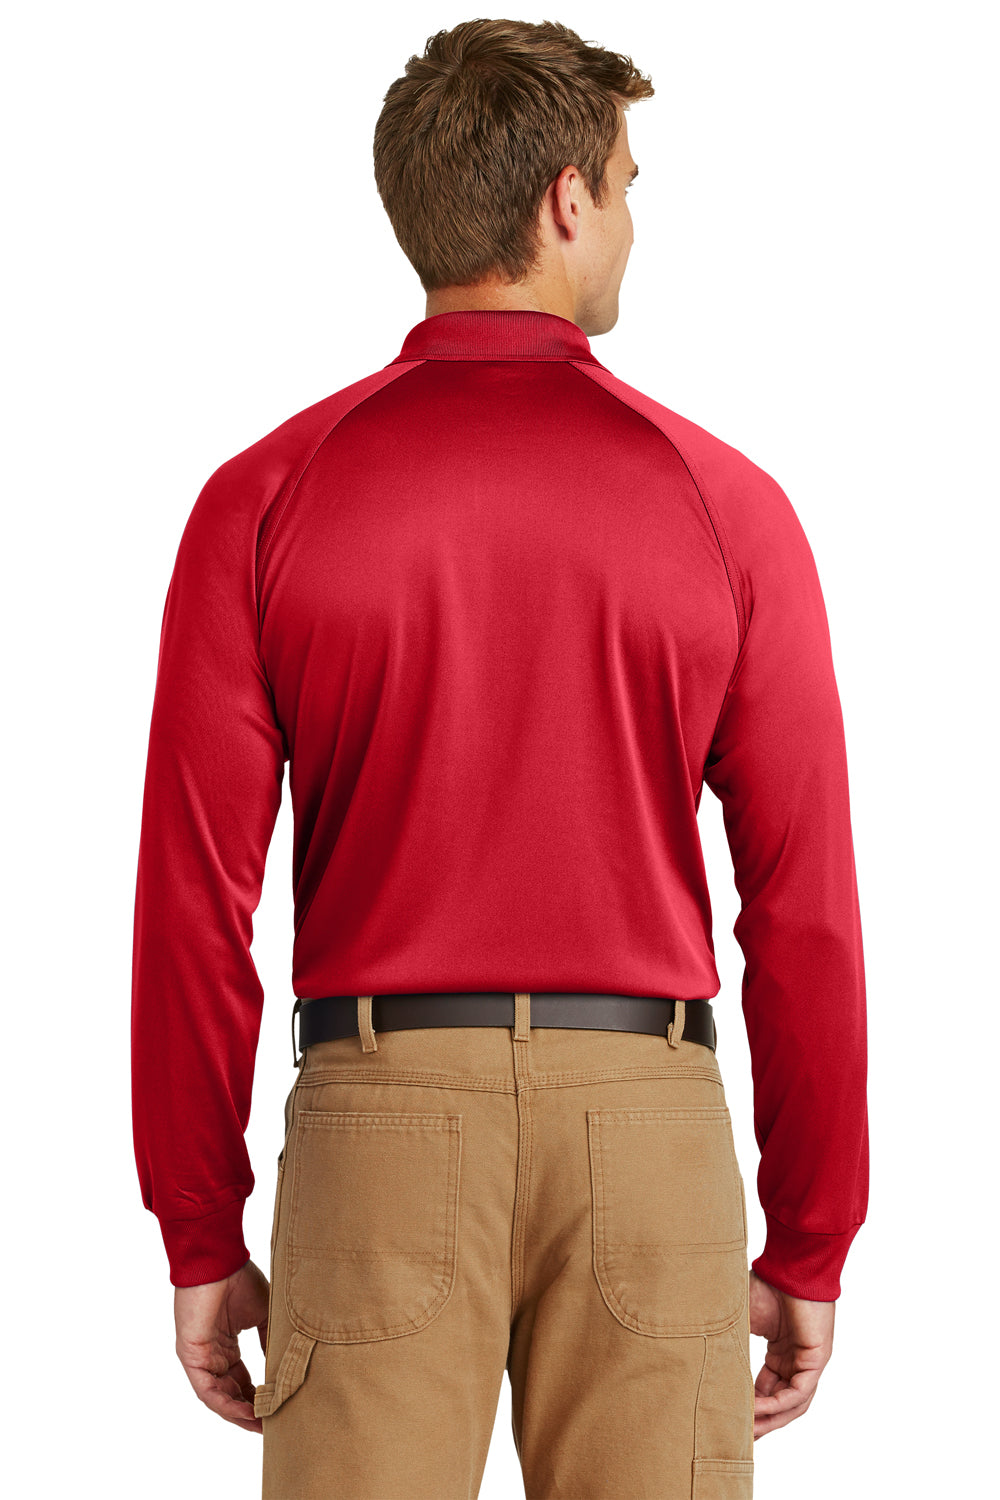 CornerStone Mens Select Tactical Moisture Wicking Long Sleeve Polo Shirt Red Back